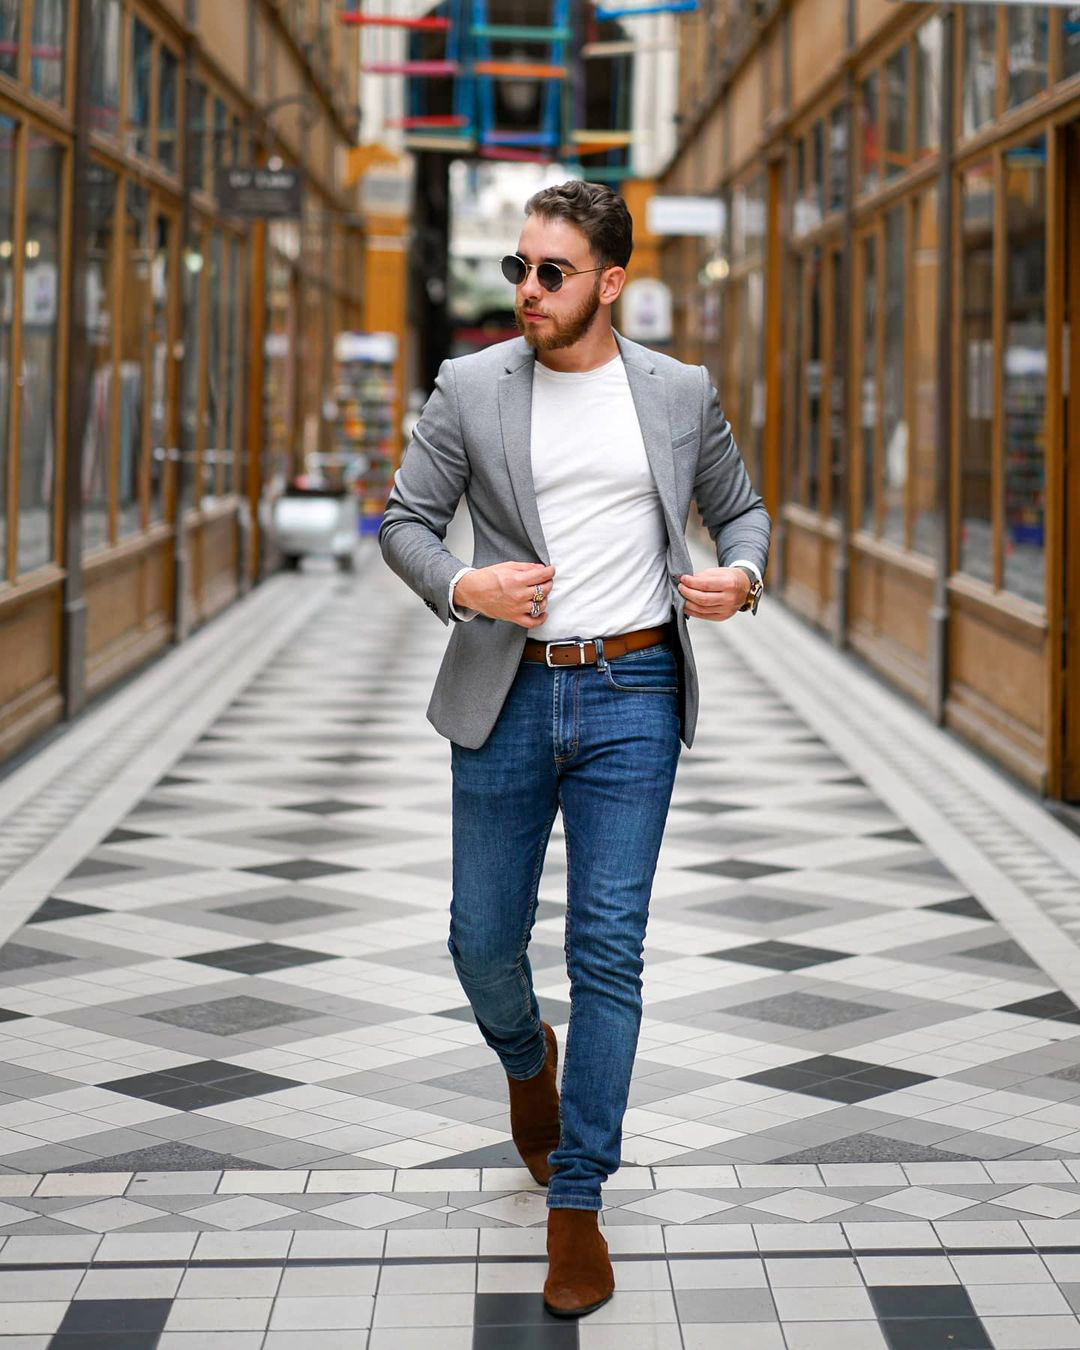 Light grey blazer, long sleeve white shirt, blue jeans, and brown suede Chelsea boots